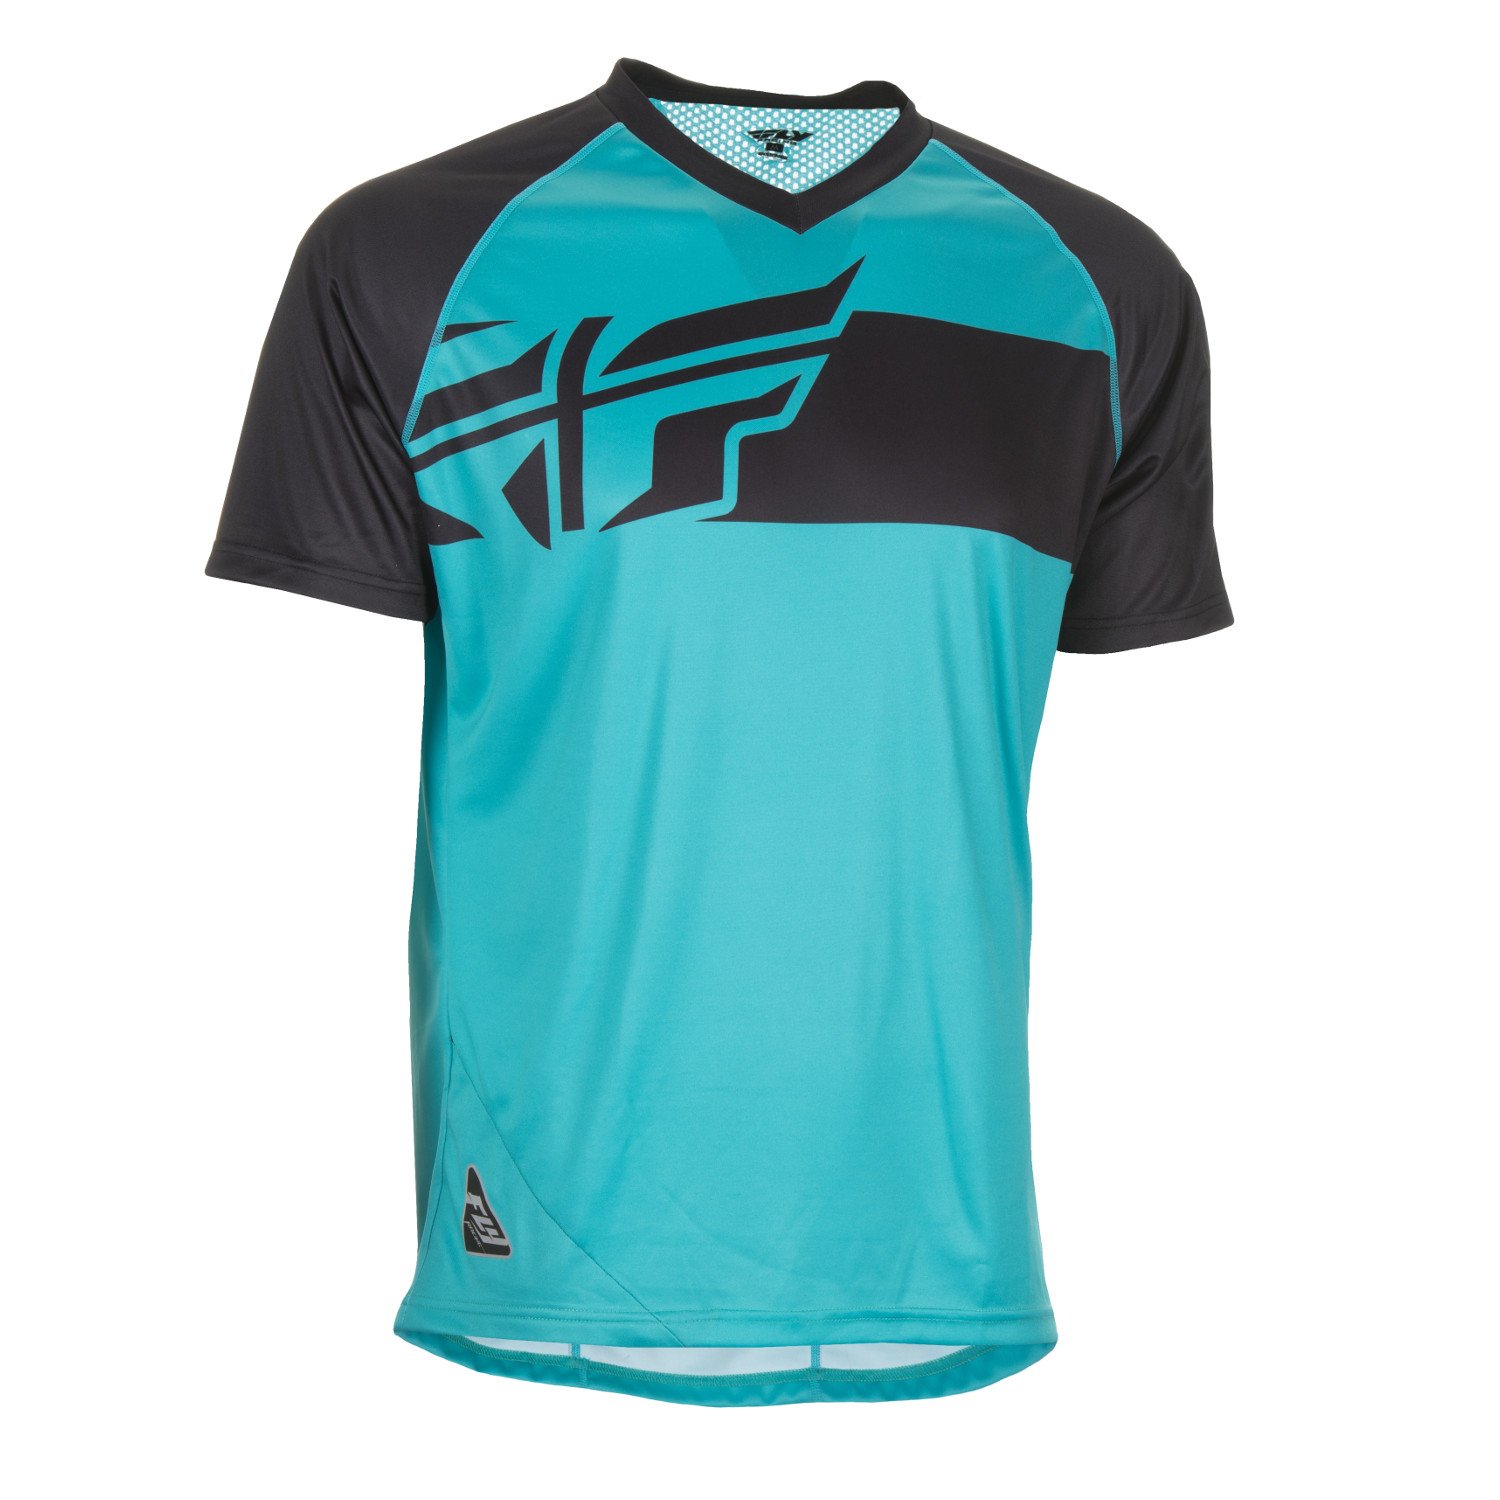 Fly Racing Maillot VTT Manches Courtes Action Elite Teal/Black